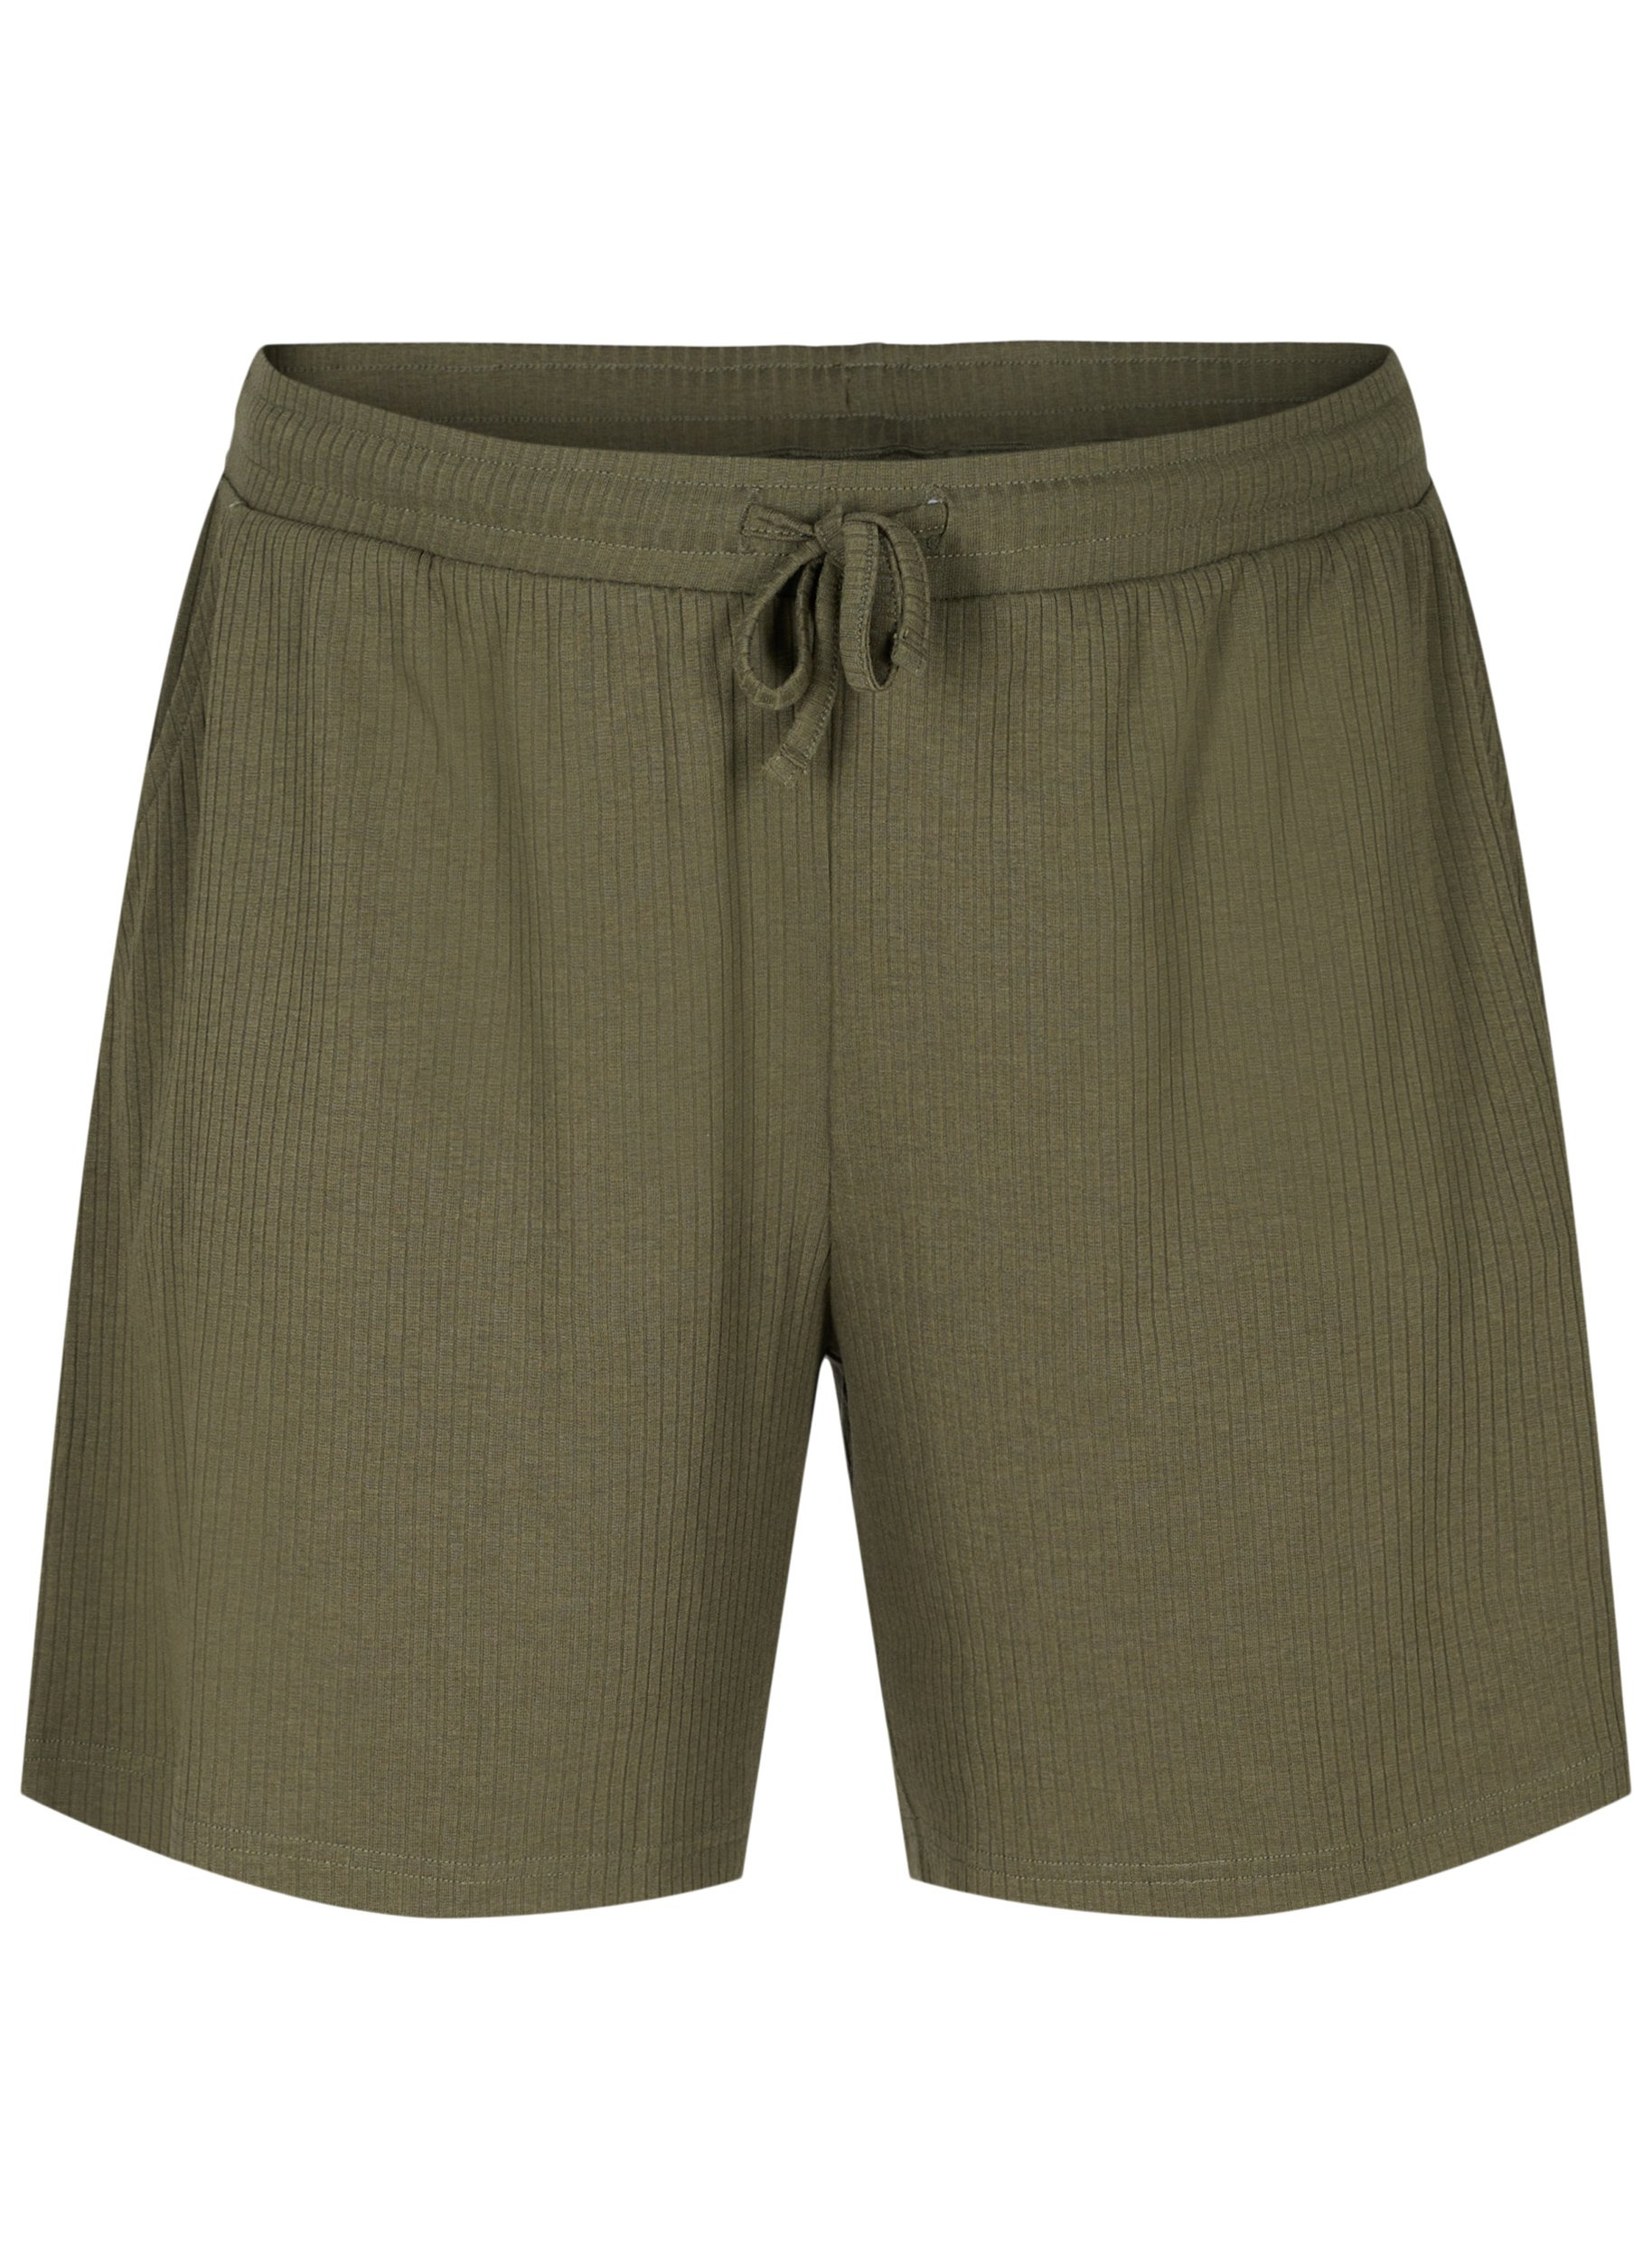 Shorts in ribbed fabric with pockets, Dusty Olive, Packshot